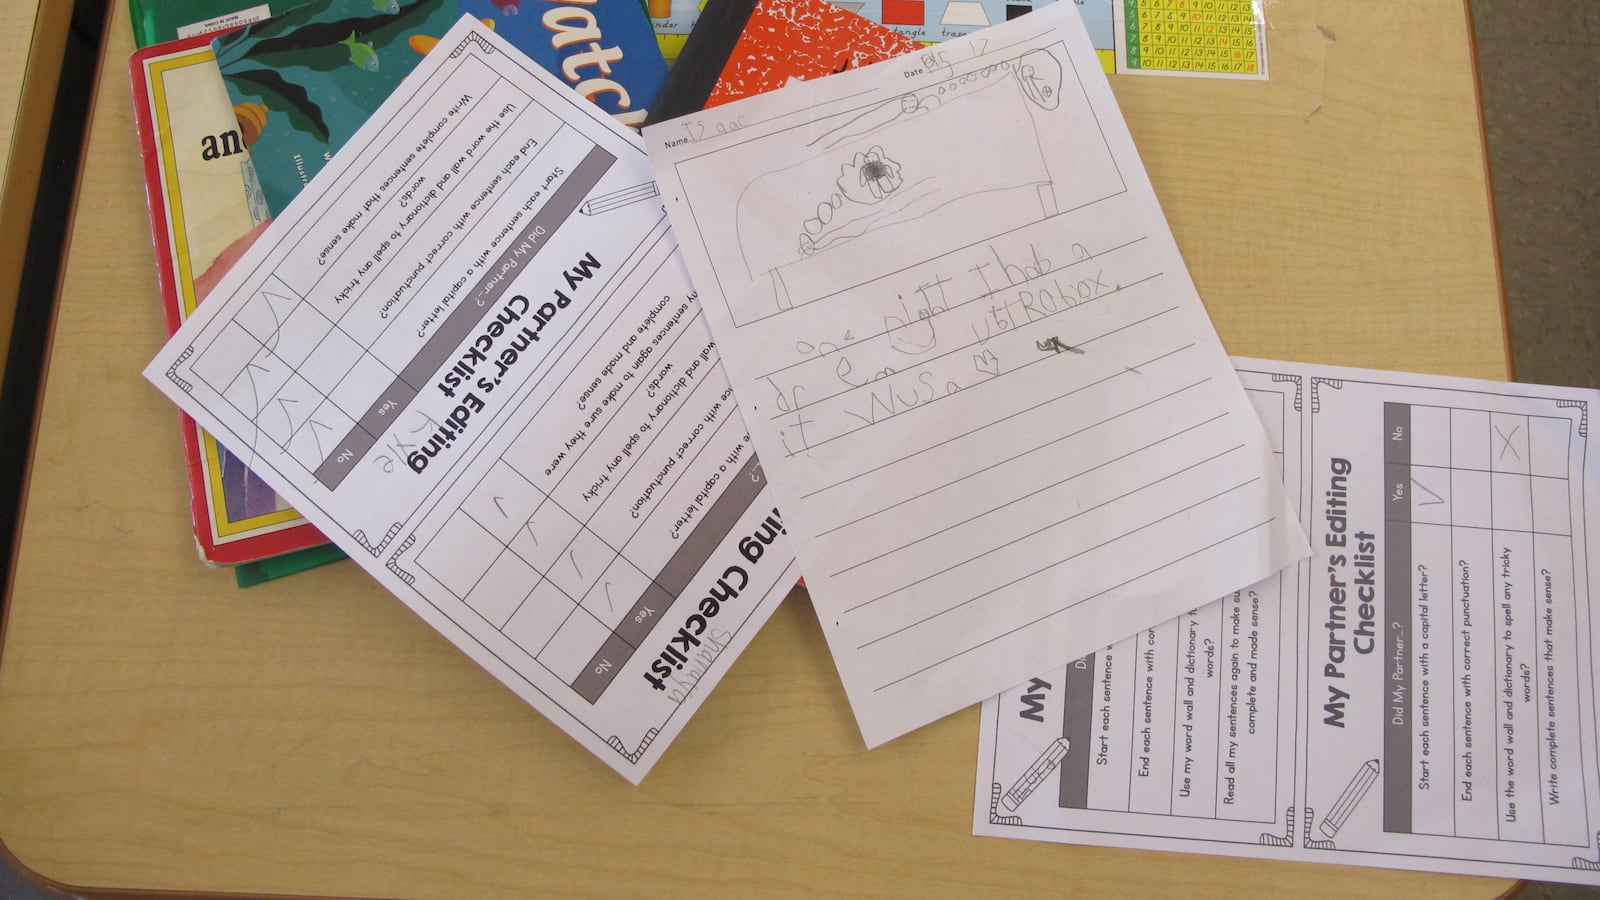 A student's writing work is scattered across a desk in a Brooklyn elementary school.